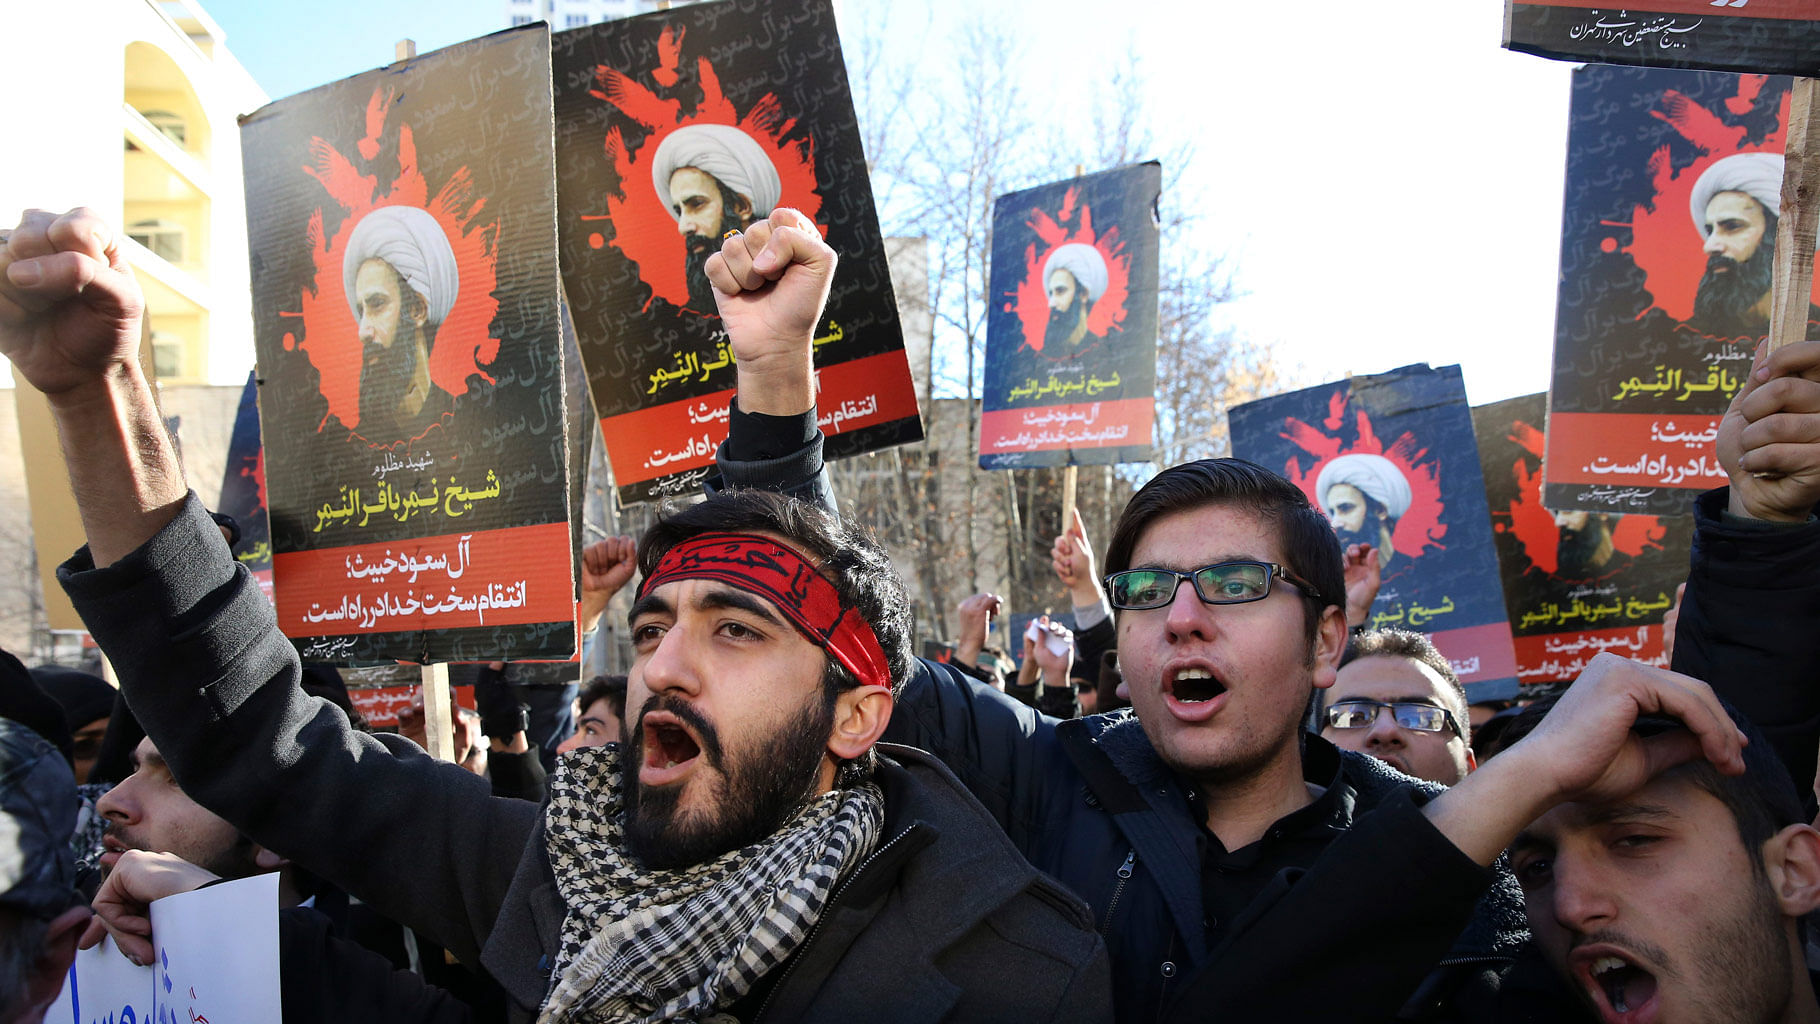  Iranian demonstrators chant slogans during a protest denouncing the execution of Sheikh Nimr al-Nimr, a prominent opposition Shiite cleric in Saudi Arabia. (Photo: AP)&nbsp;